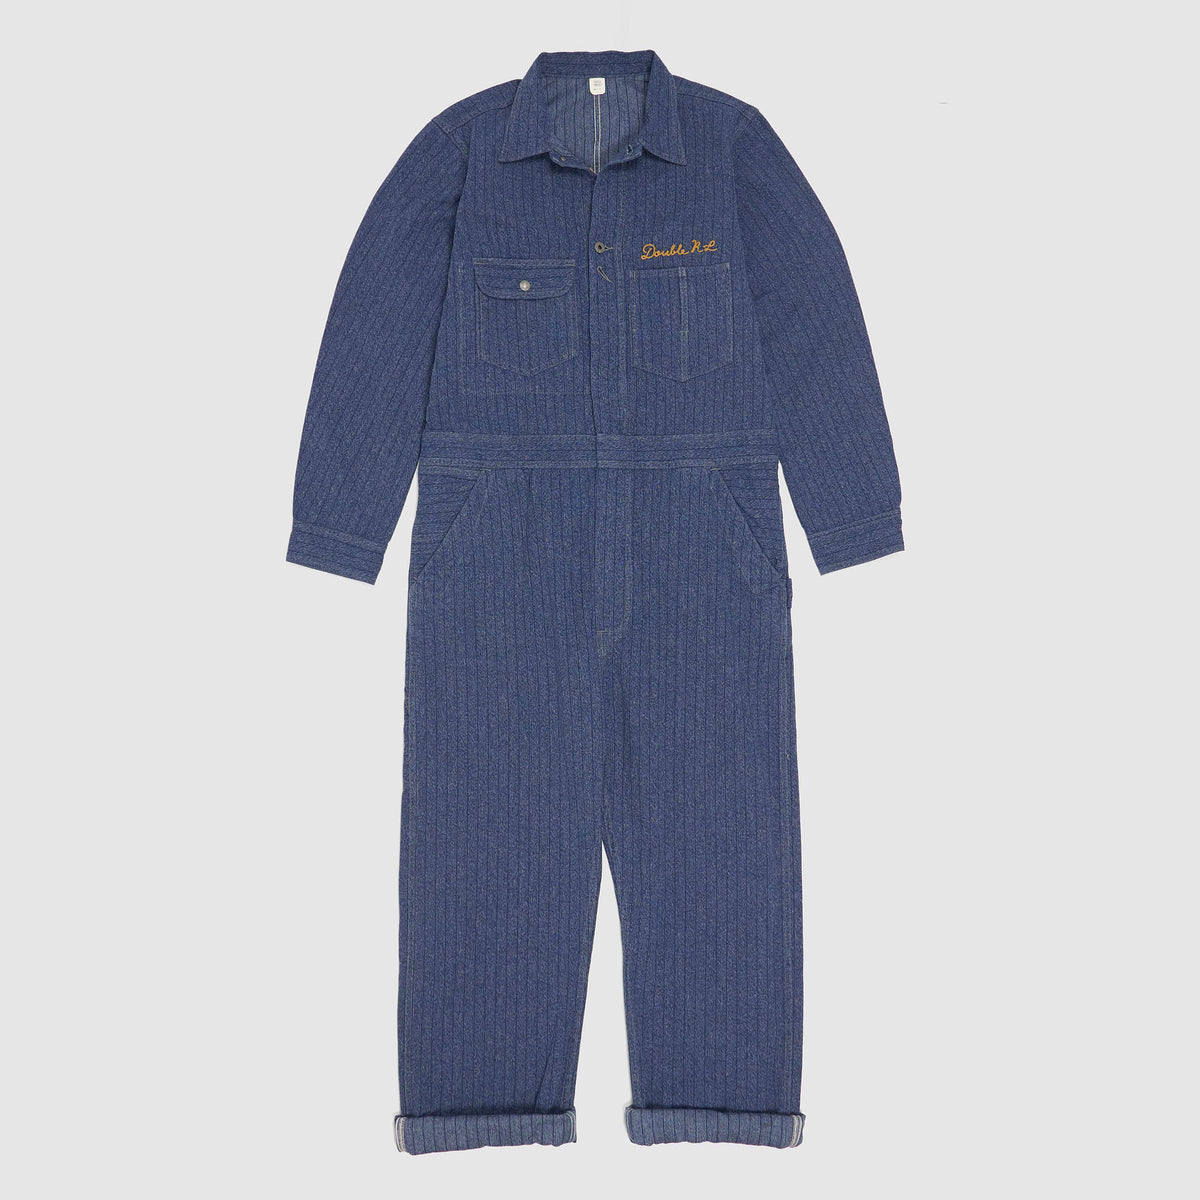 Double RL HD Workwear Overall